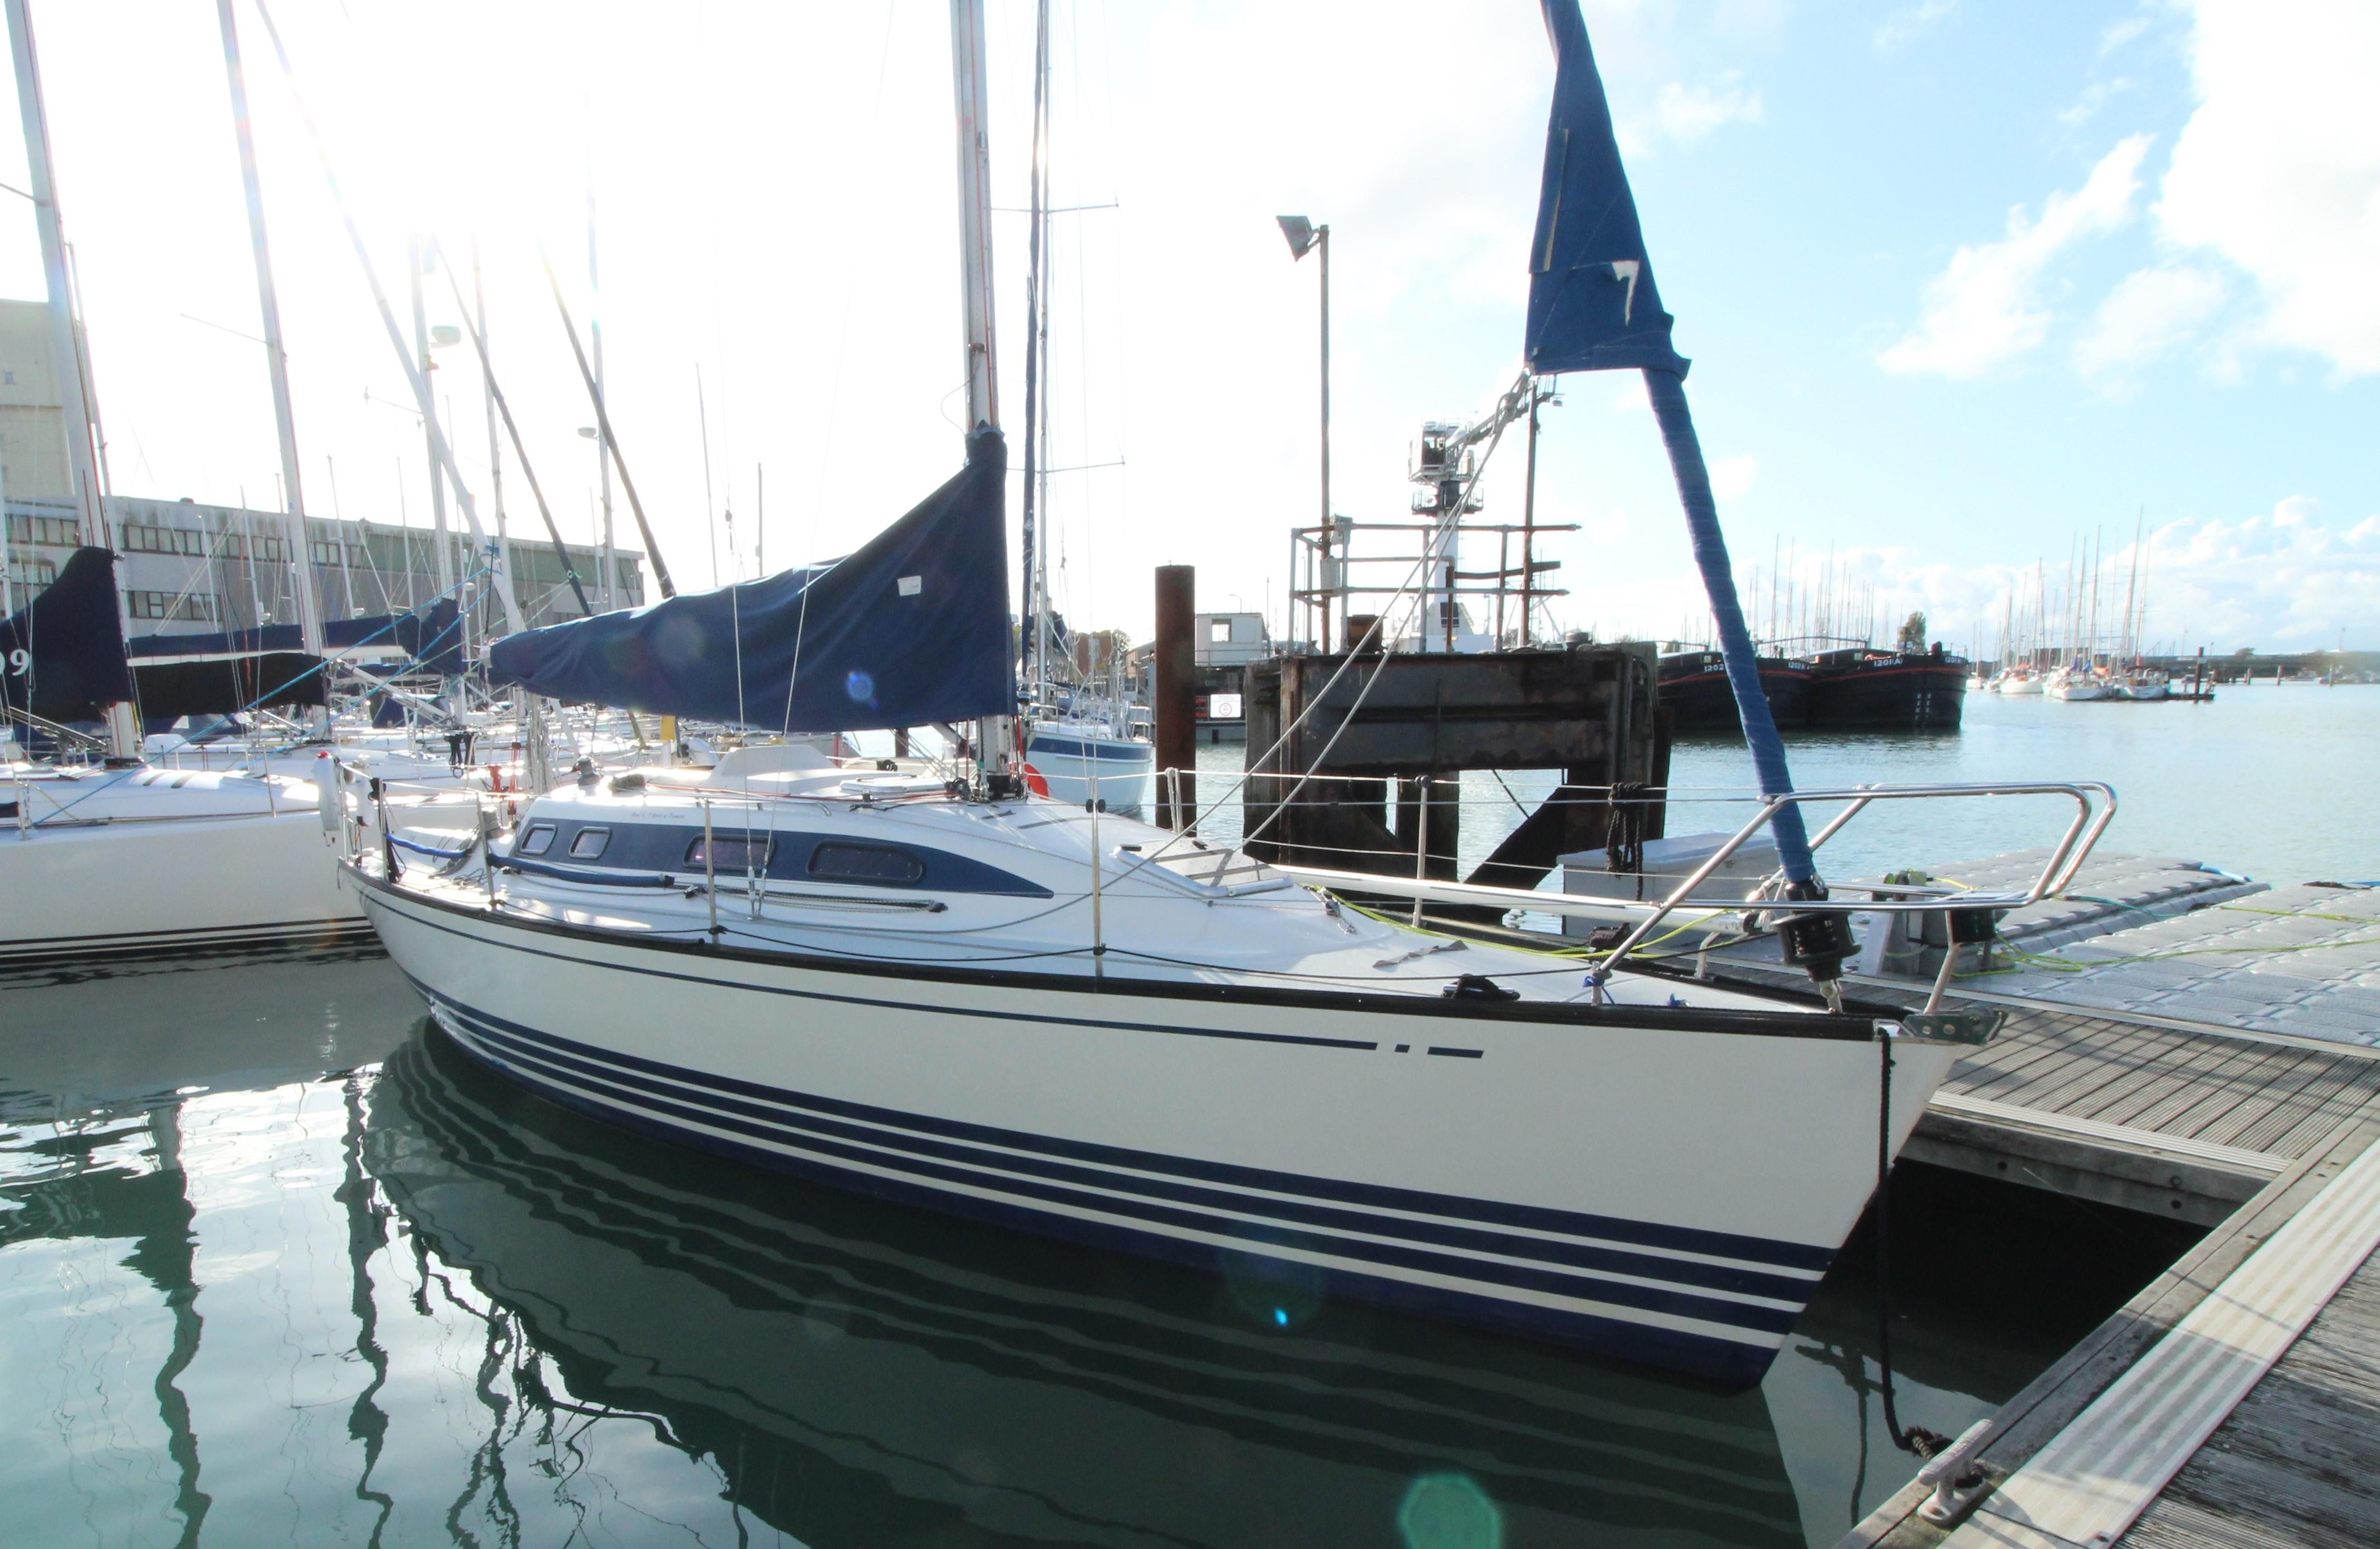 2000-x-yachts-x-332-sail-new-and-used-boats-for-sale-www-yachtworld-co-uk